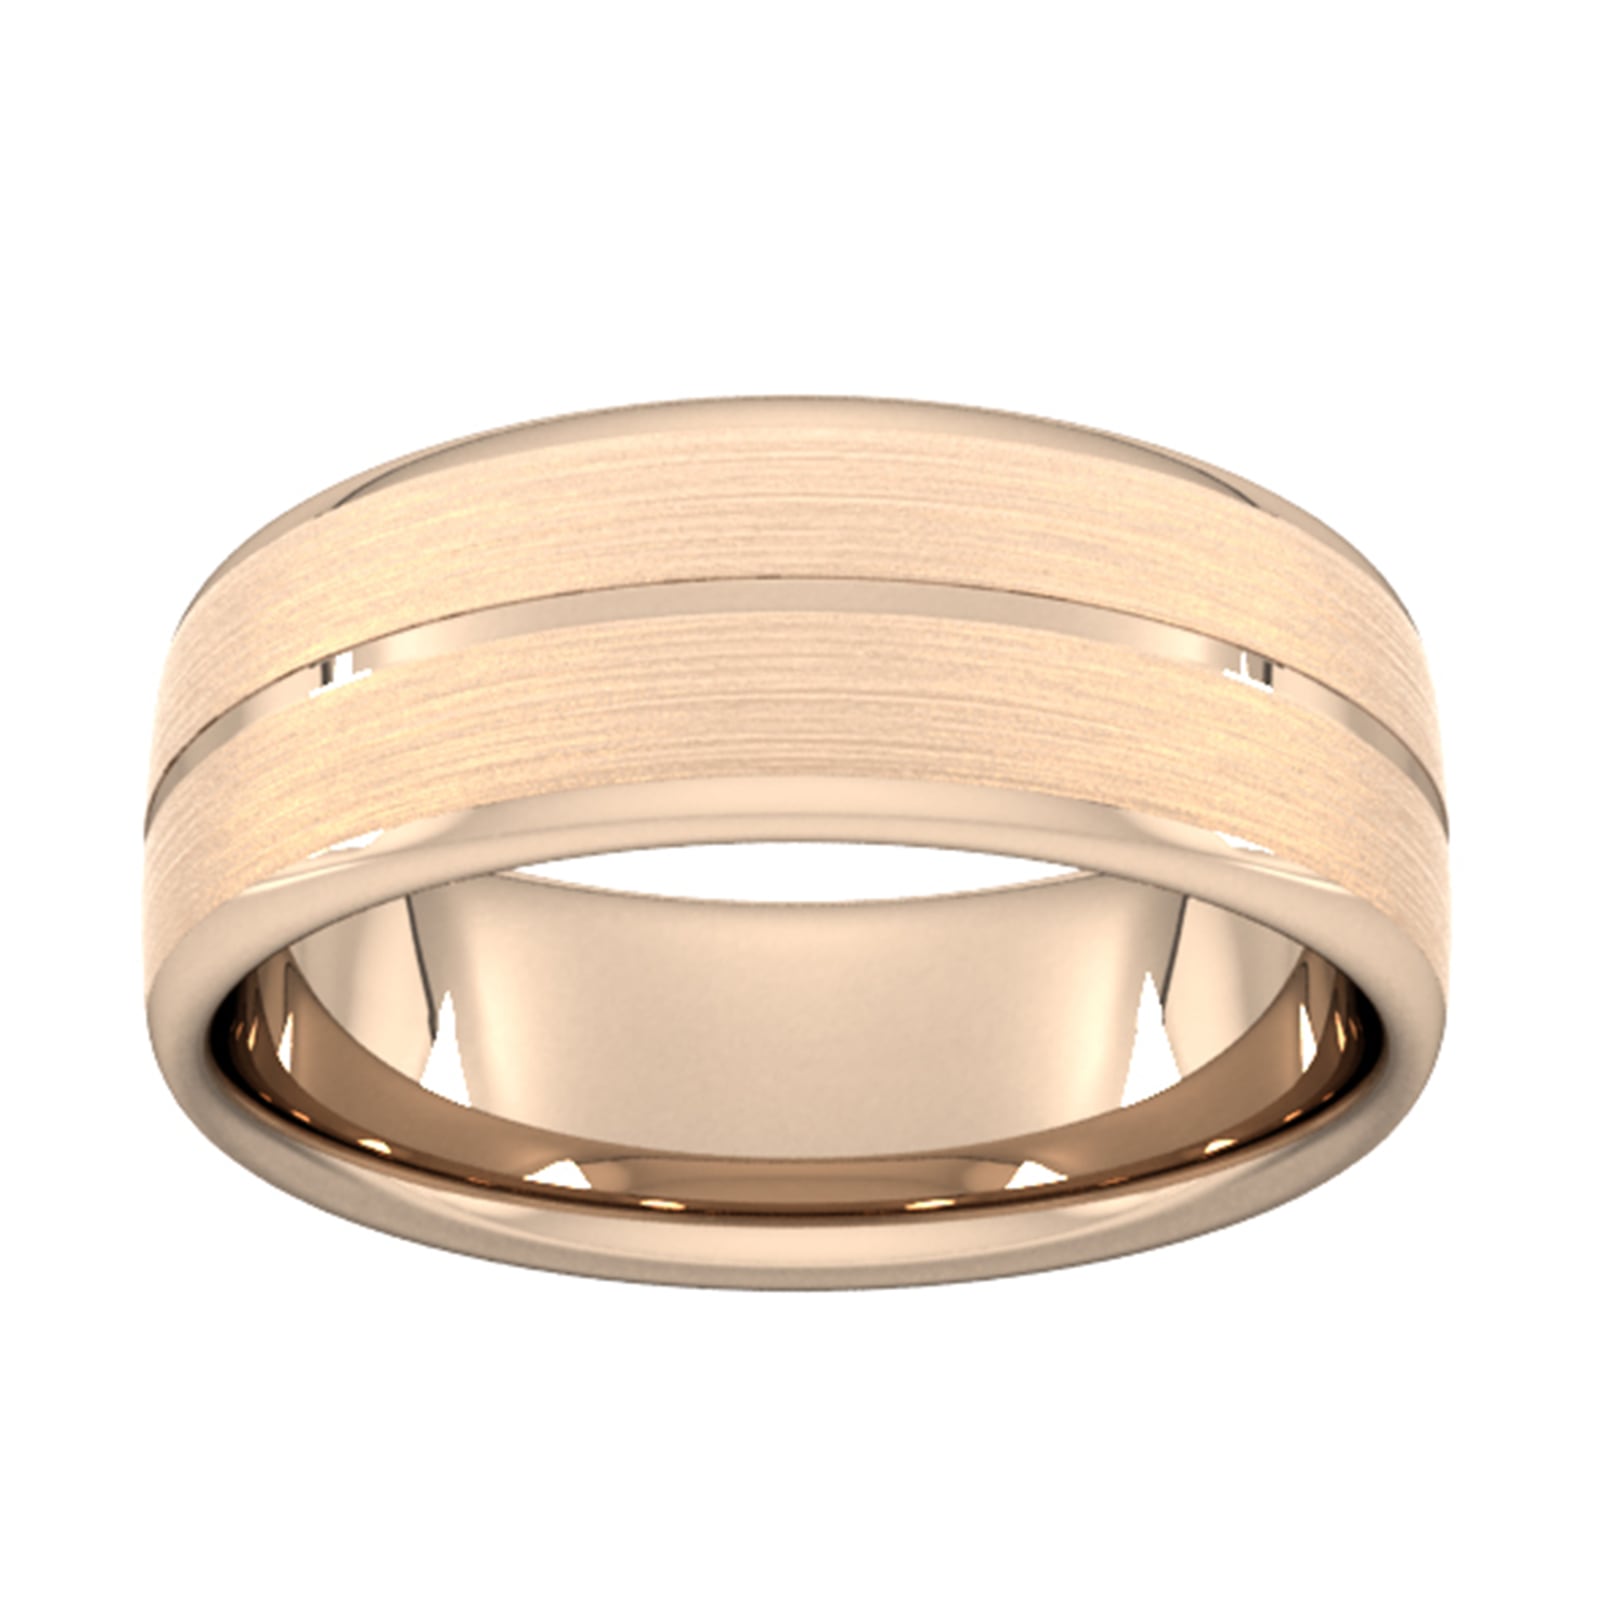 8mm Flat Court Heavy Centre Groove With Chamfered Edge Wedding Ring In 18 Carat Rose Gold - Ring Size X